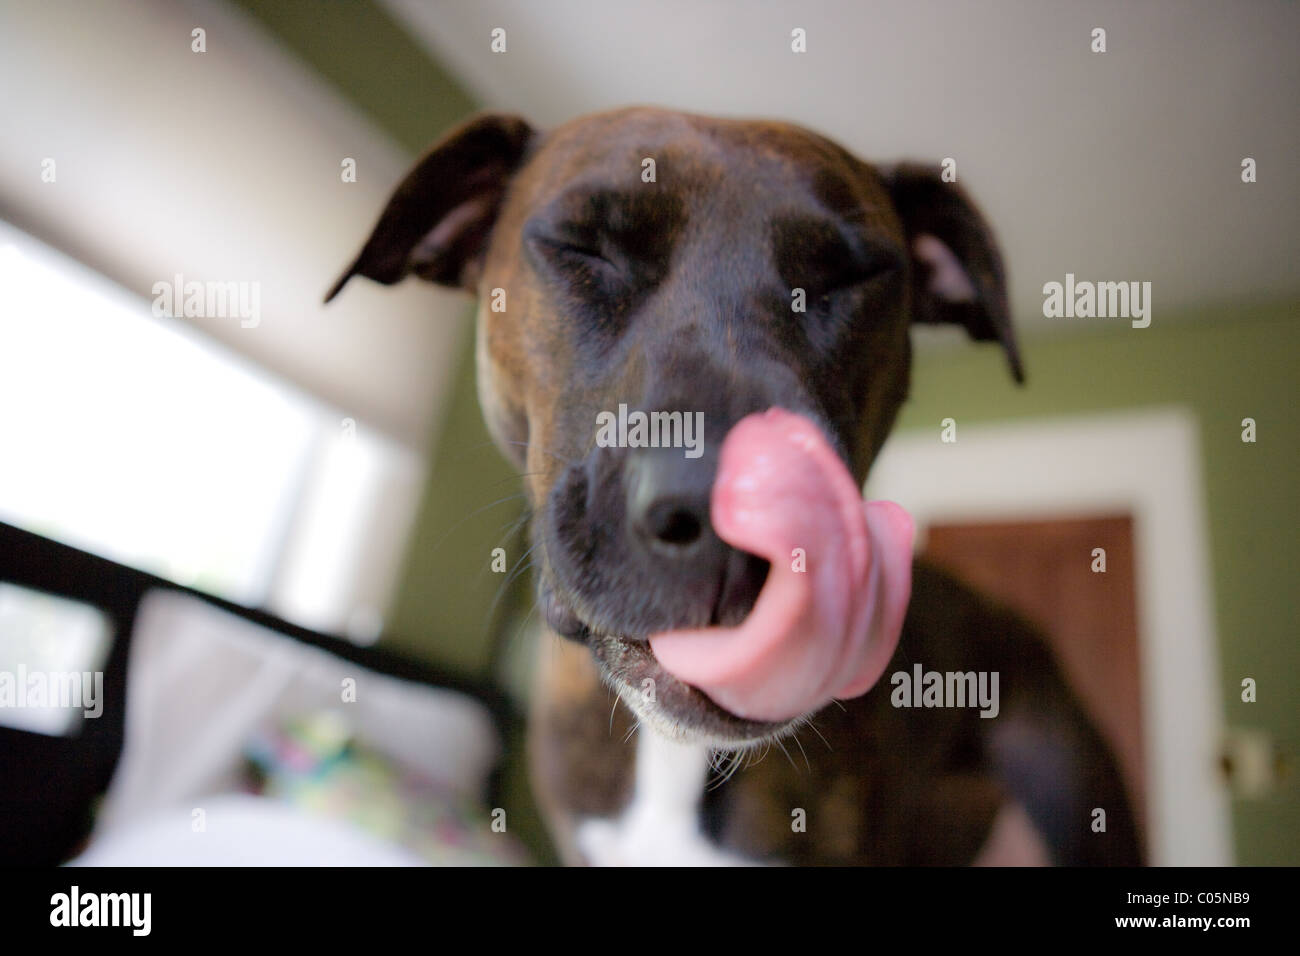 Dog licking her nose with a very long tongue. Stock Photo